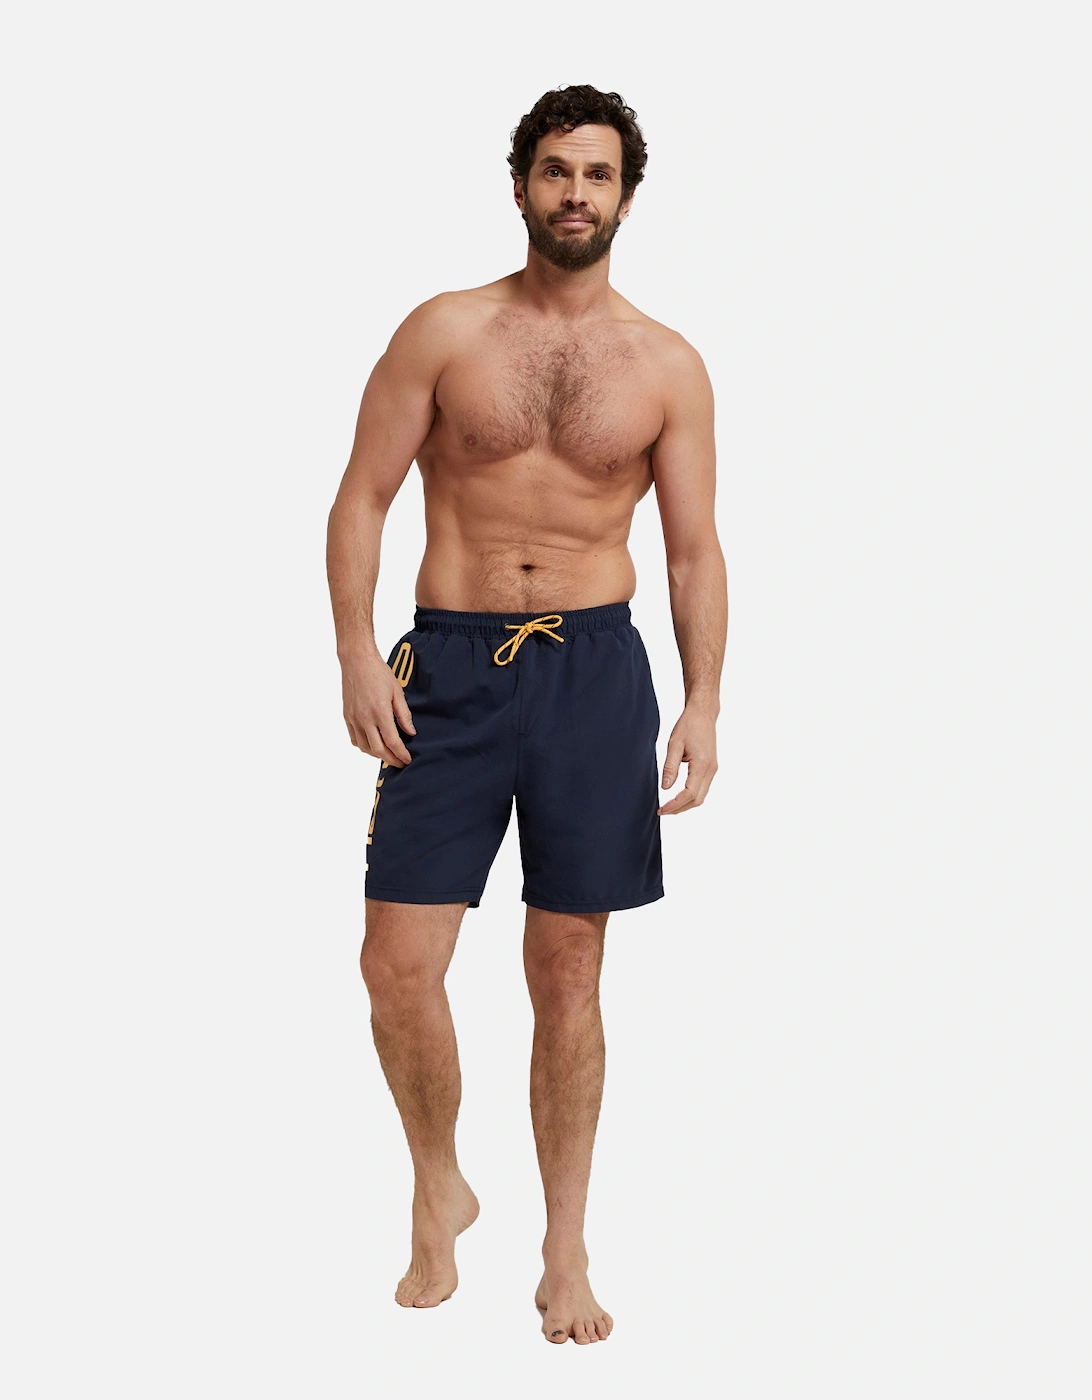 Mens Deep Dive Recycled Boardshorts